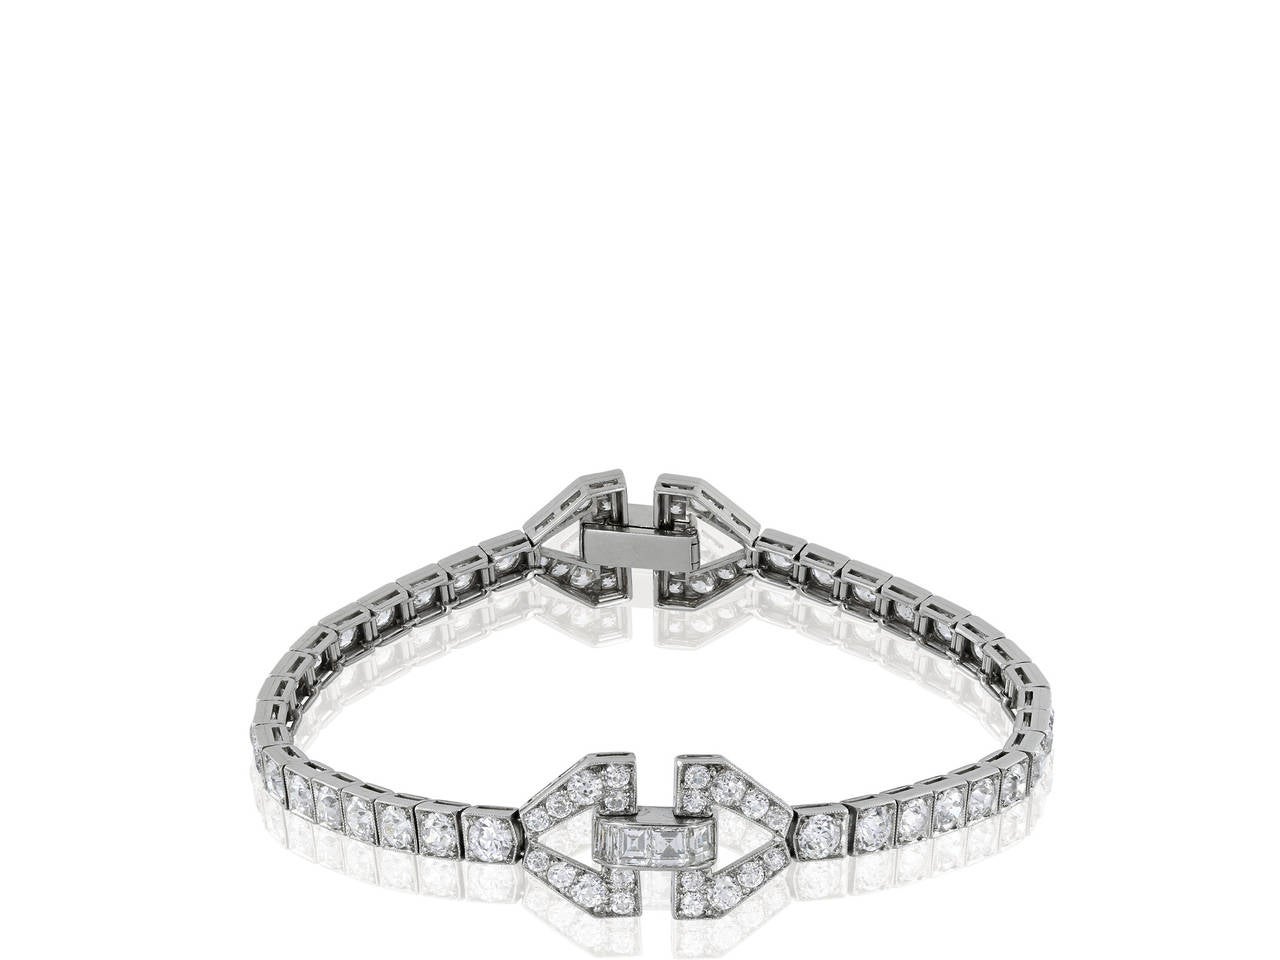 Platinum Art Deco bracelet consisting of  square cut and old European cut diamond weighing approximately 7.83 carats.